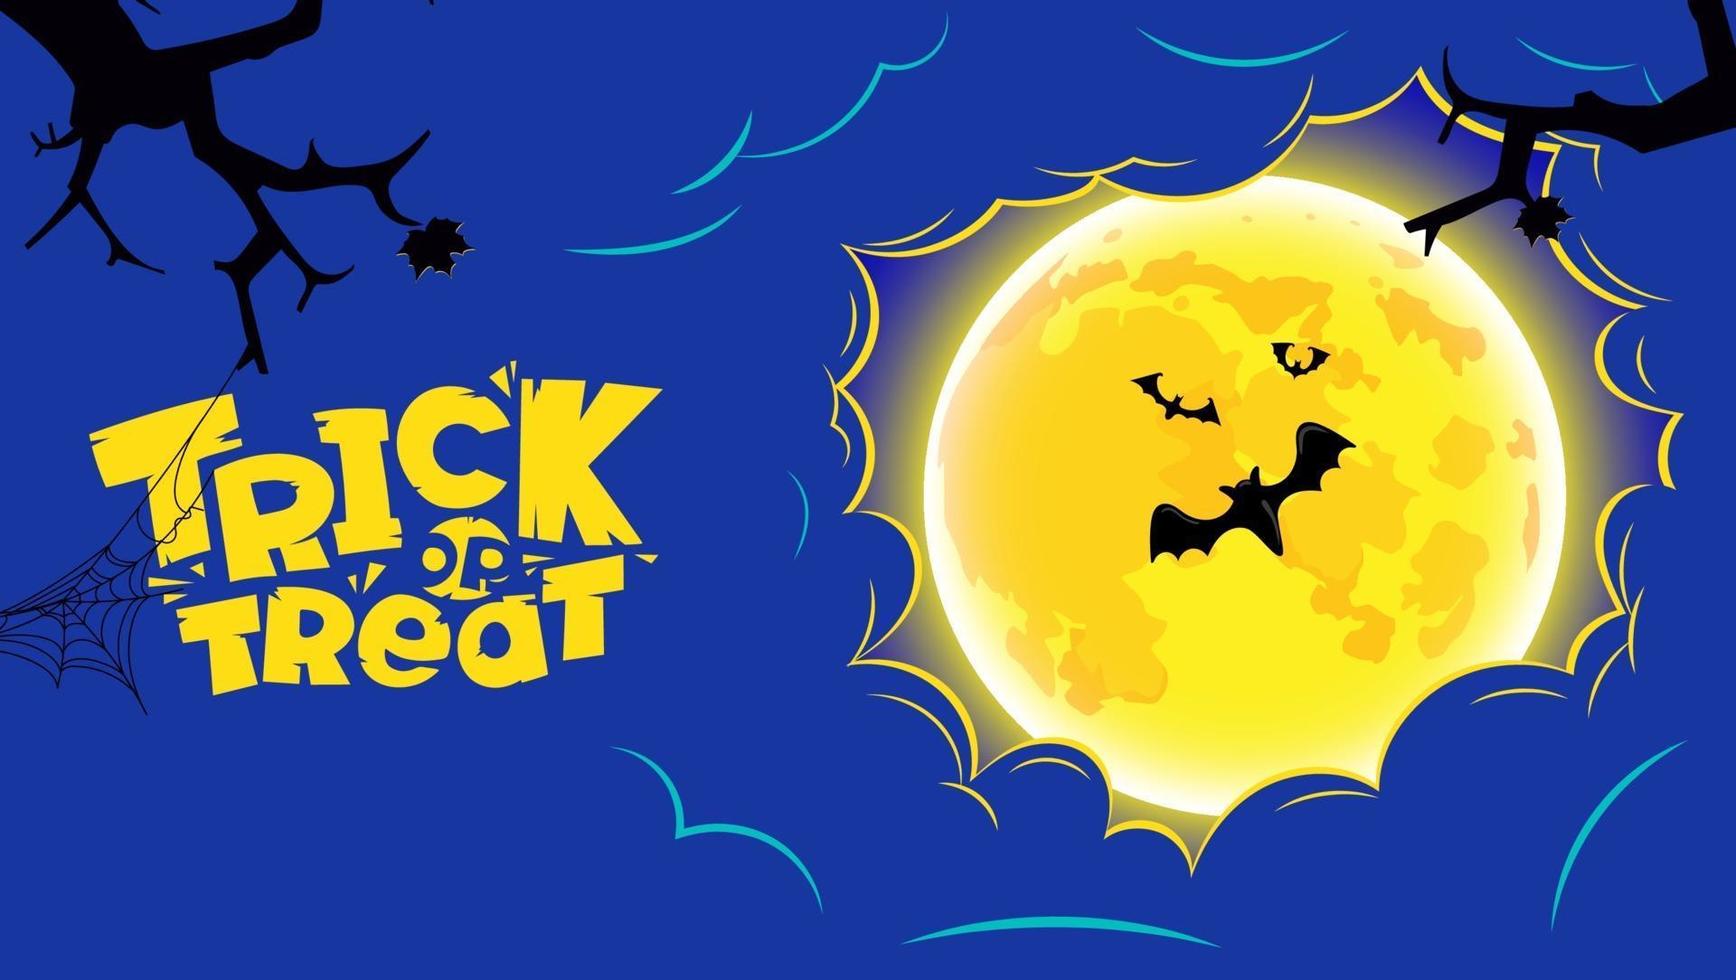 Trick or treat. Halloween party vector banner template